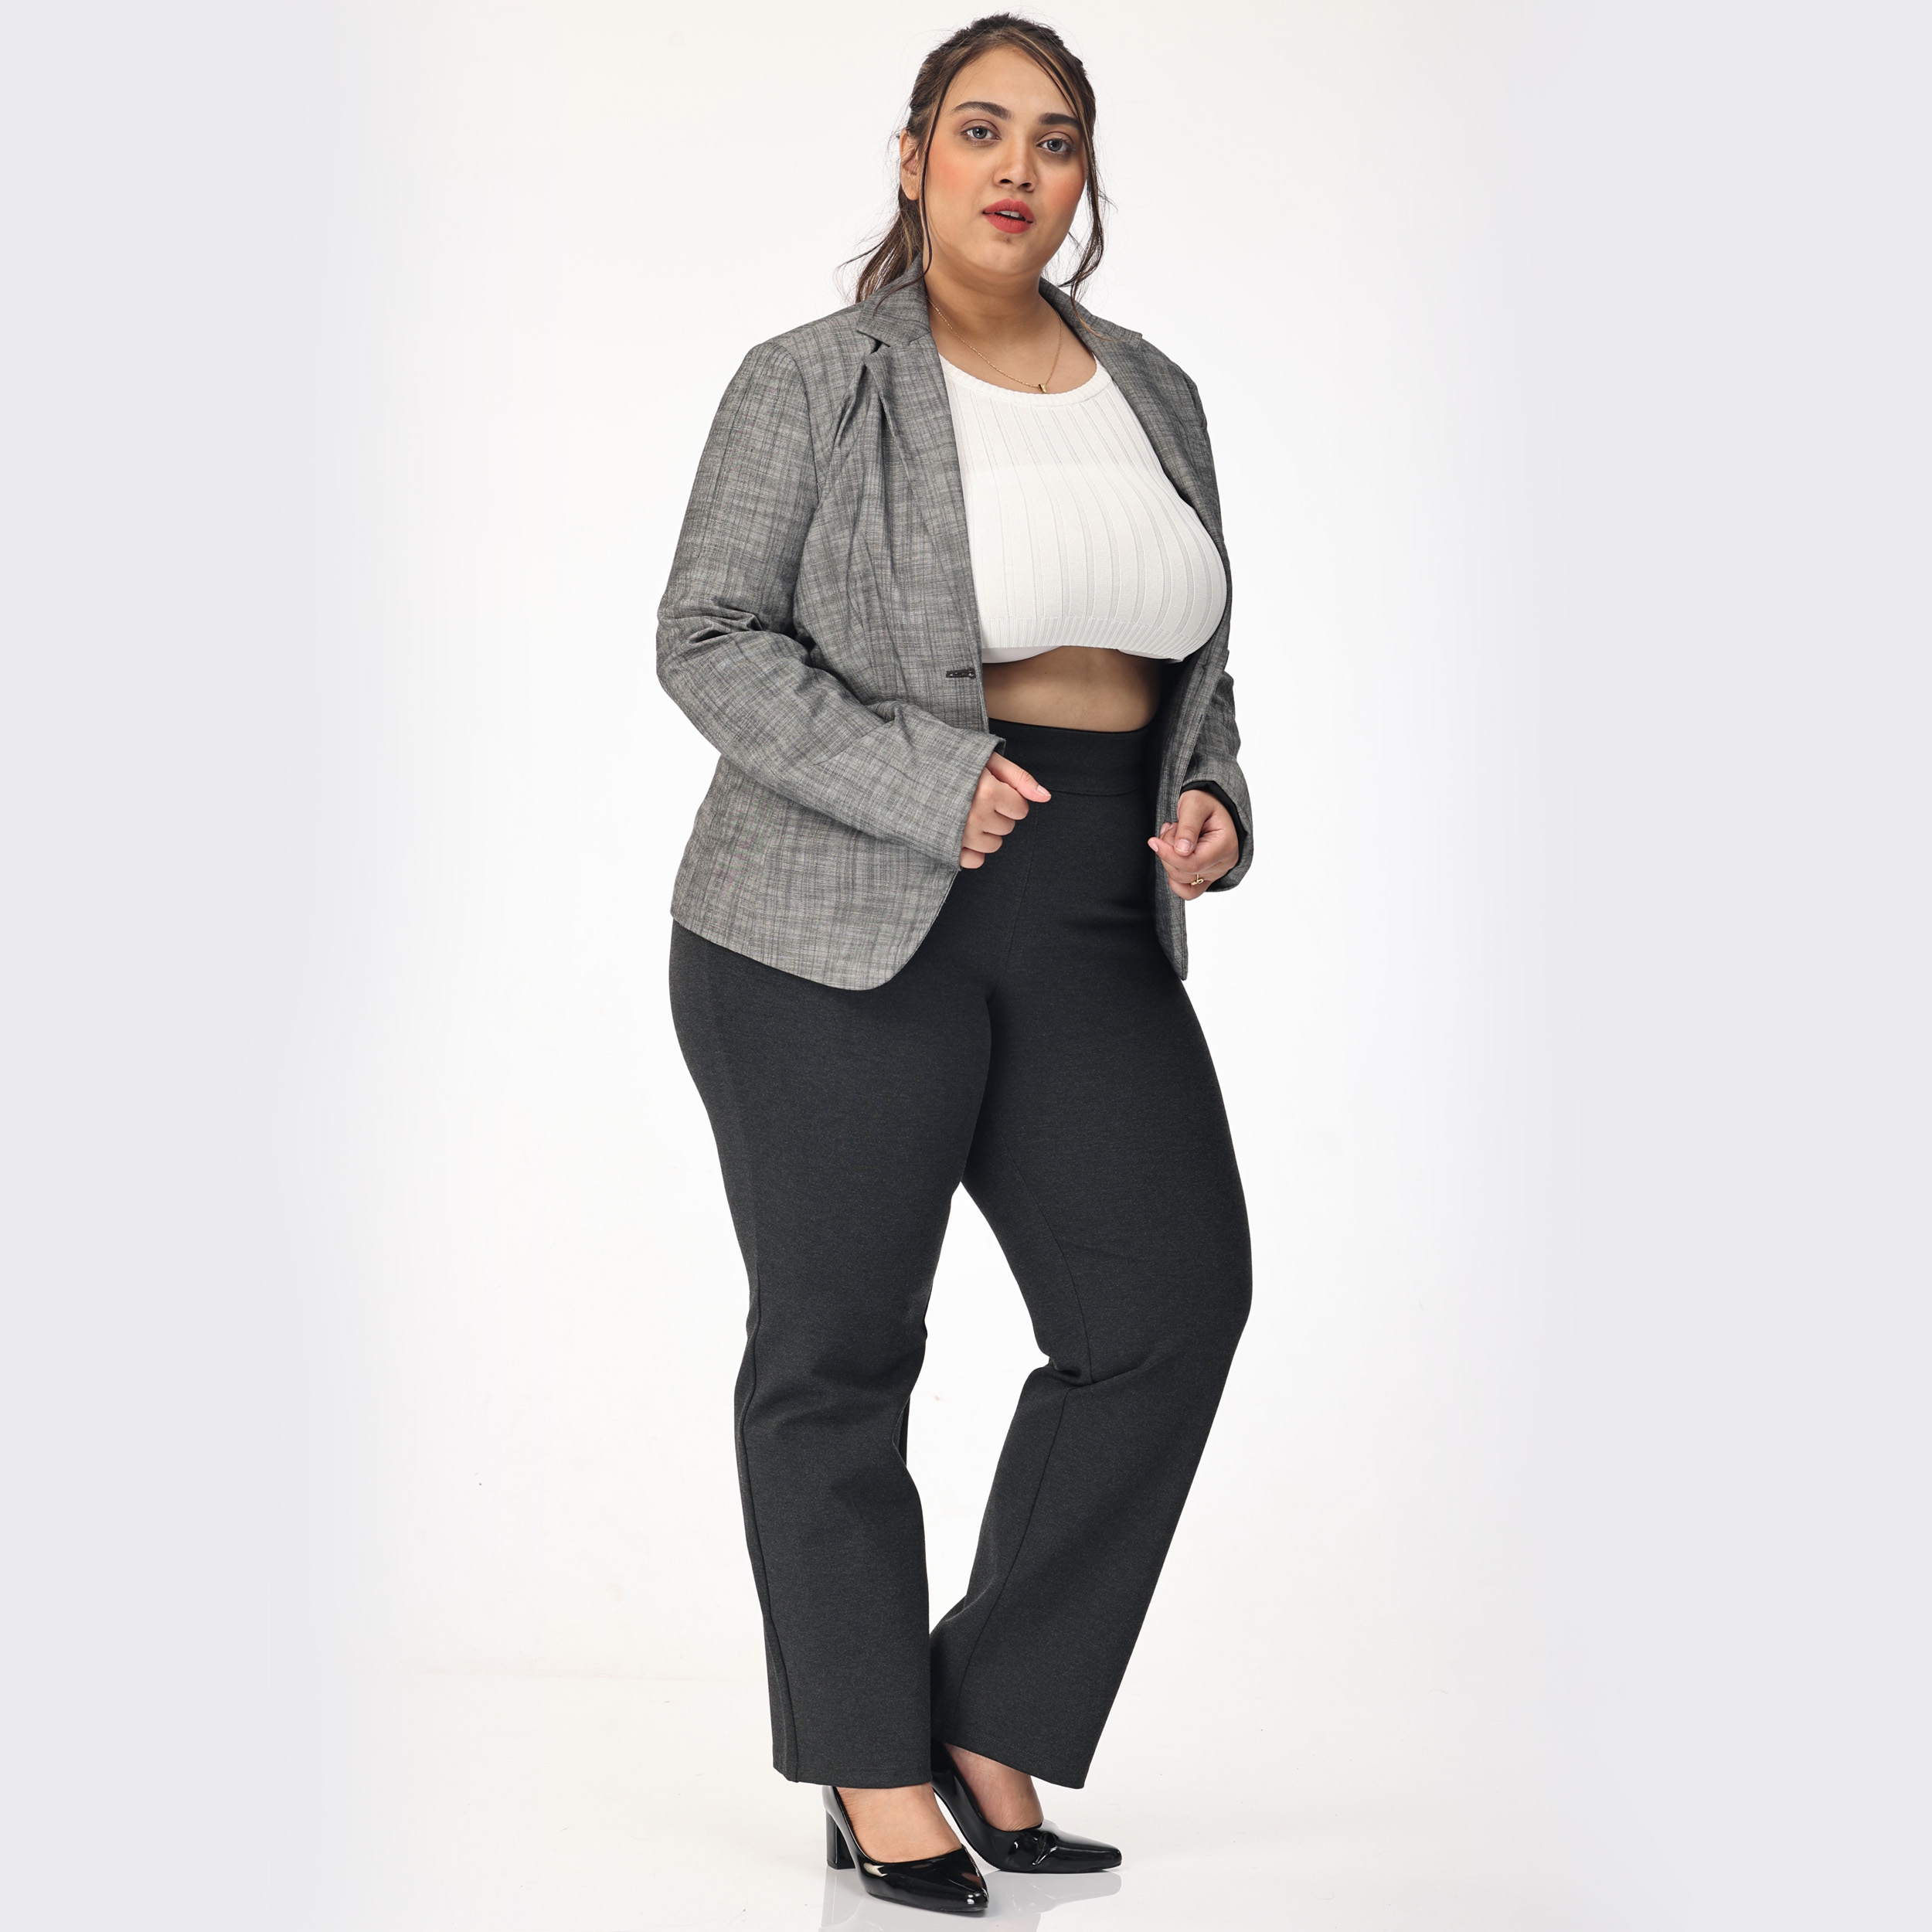 Plus Size Winter Business Casual Outfits - Alexa Webb